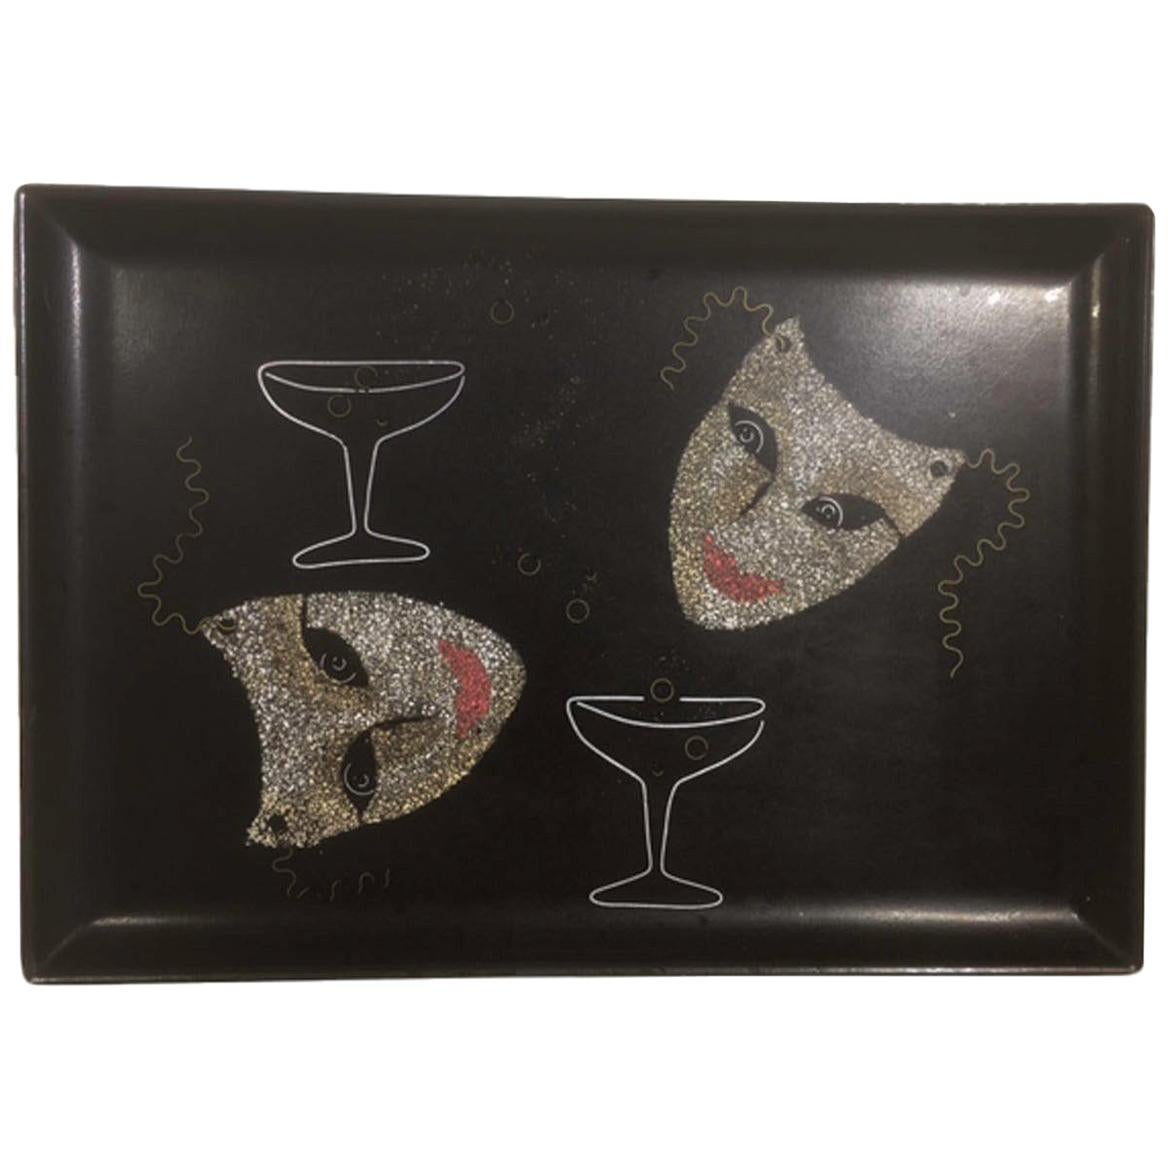 Mid 20th Century Couroc Phenolic Resin Serving Tray, Inlaid Stone & Metal Masks For Sale